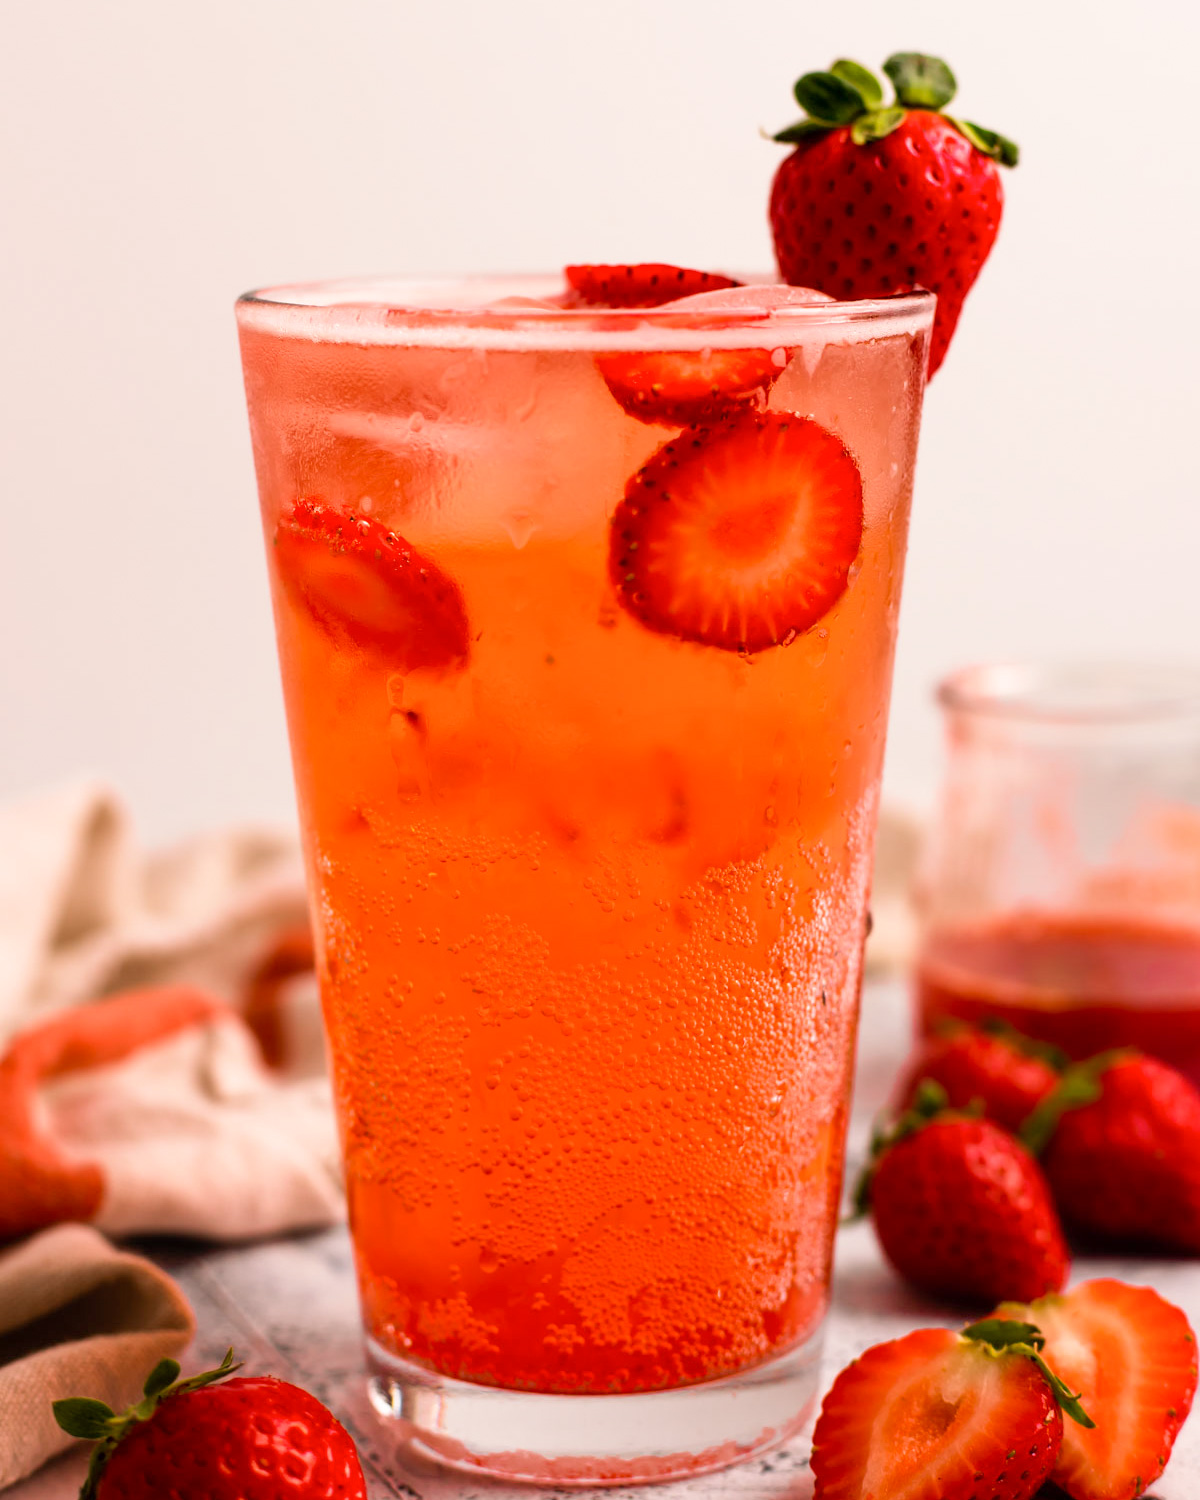 A side shot of a tall glass of strawberry soda on the counter with strawberries and a dish towel.